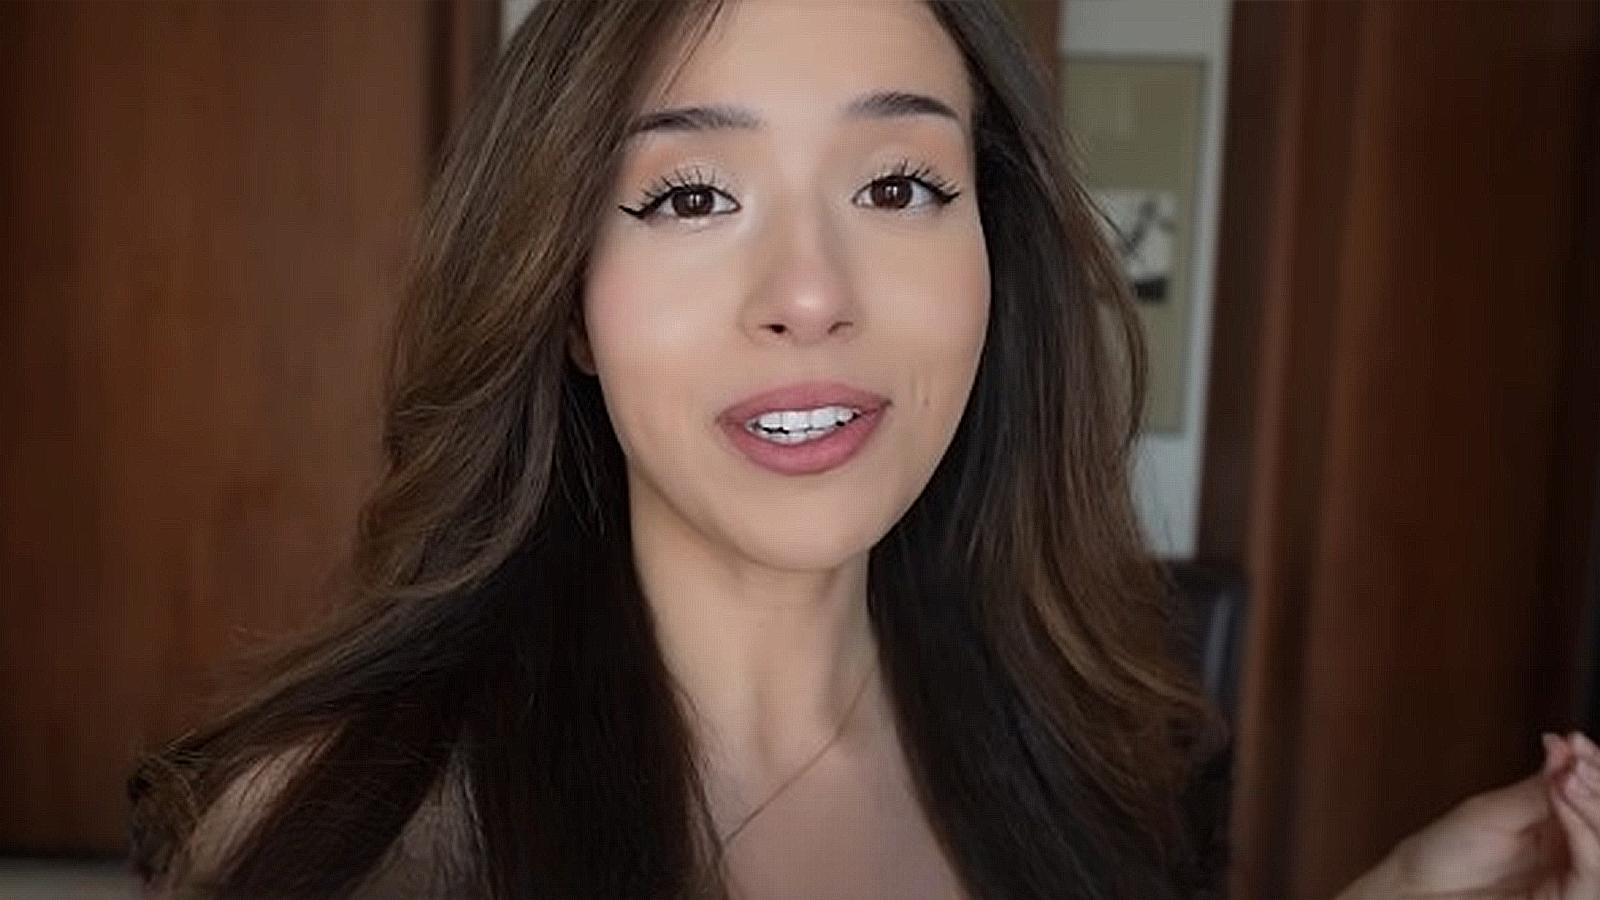 Valkyrae defends Corpse Husband after “face reveal” drama - Dexerto